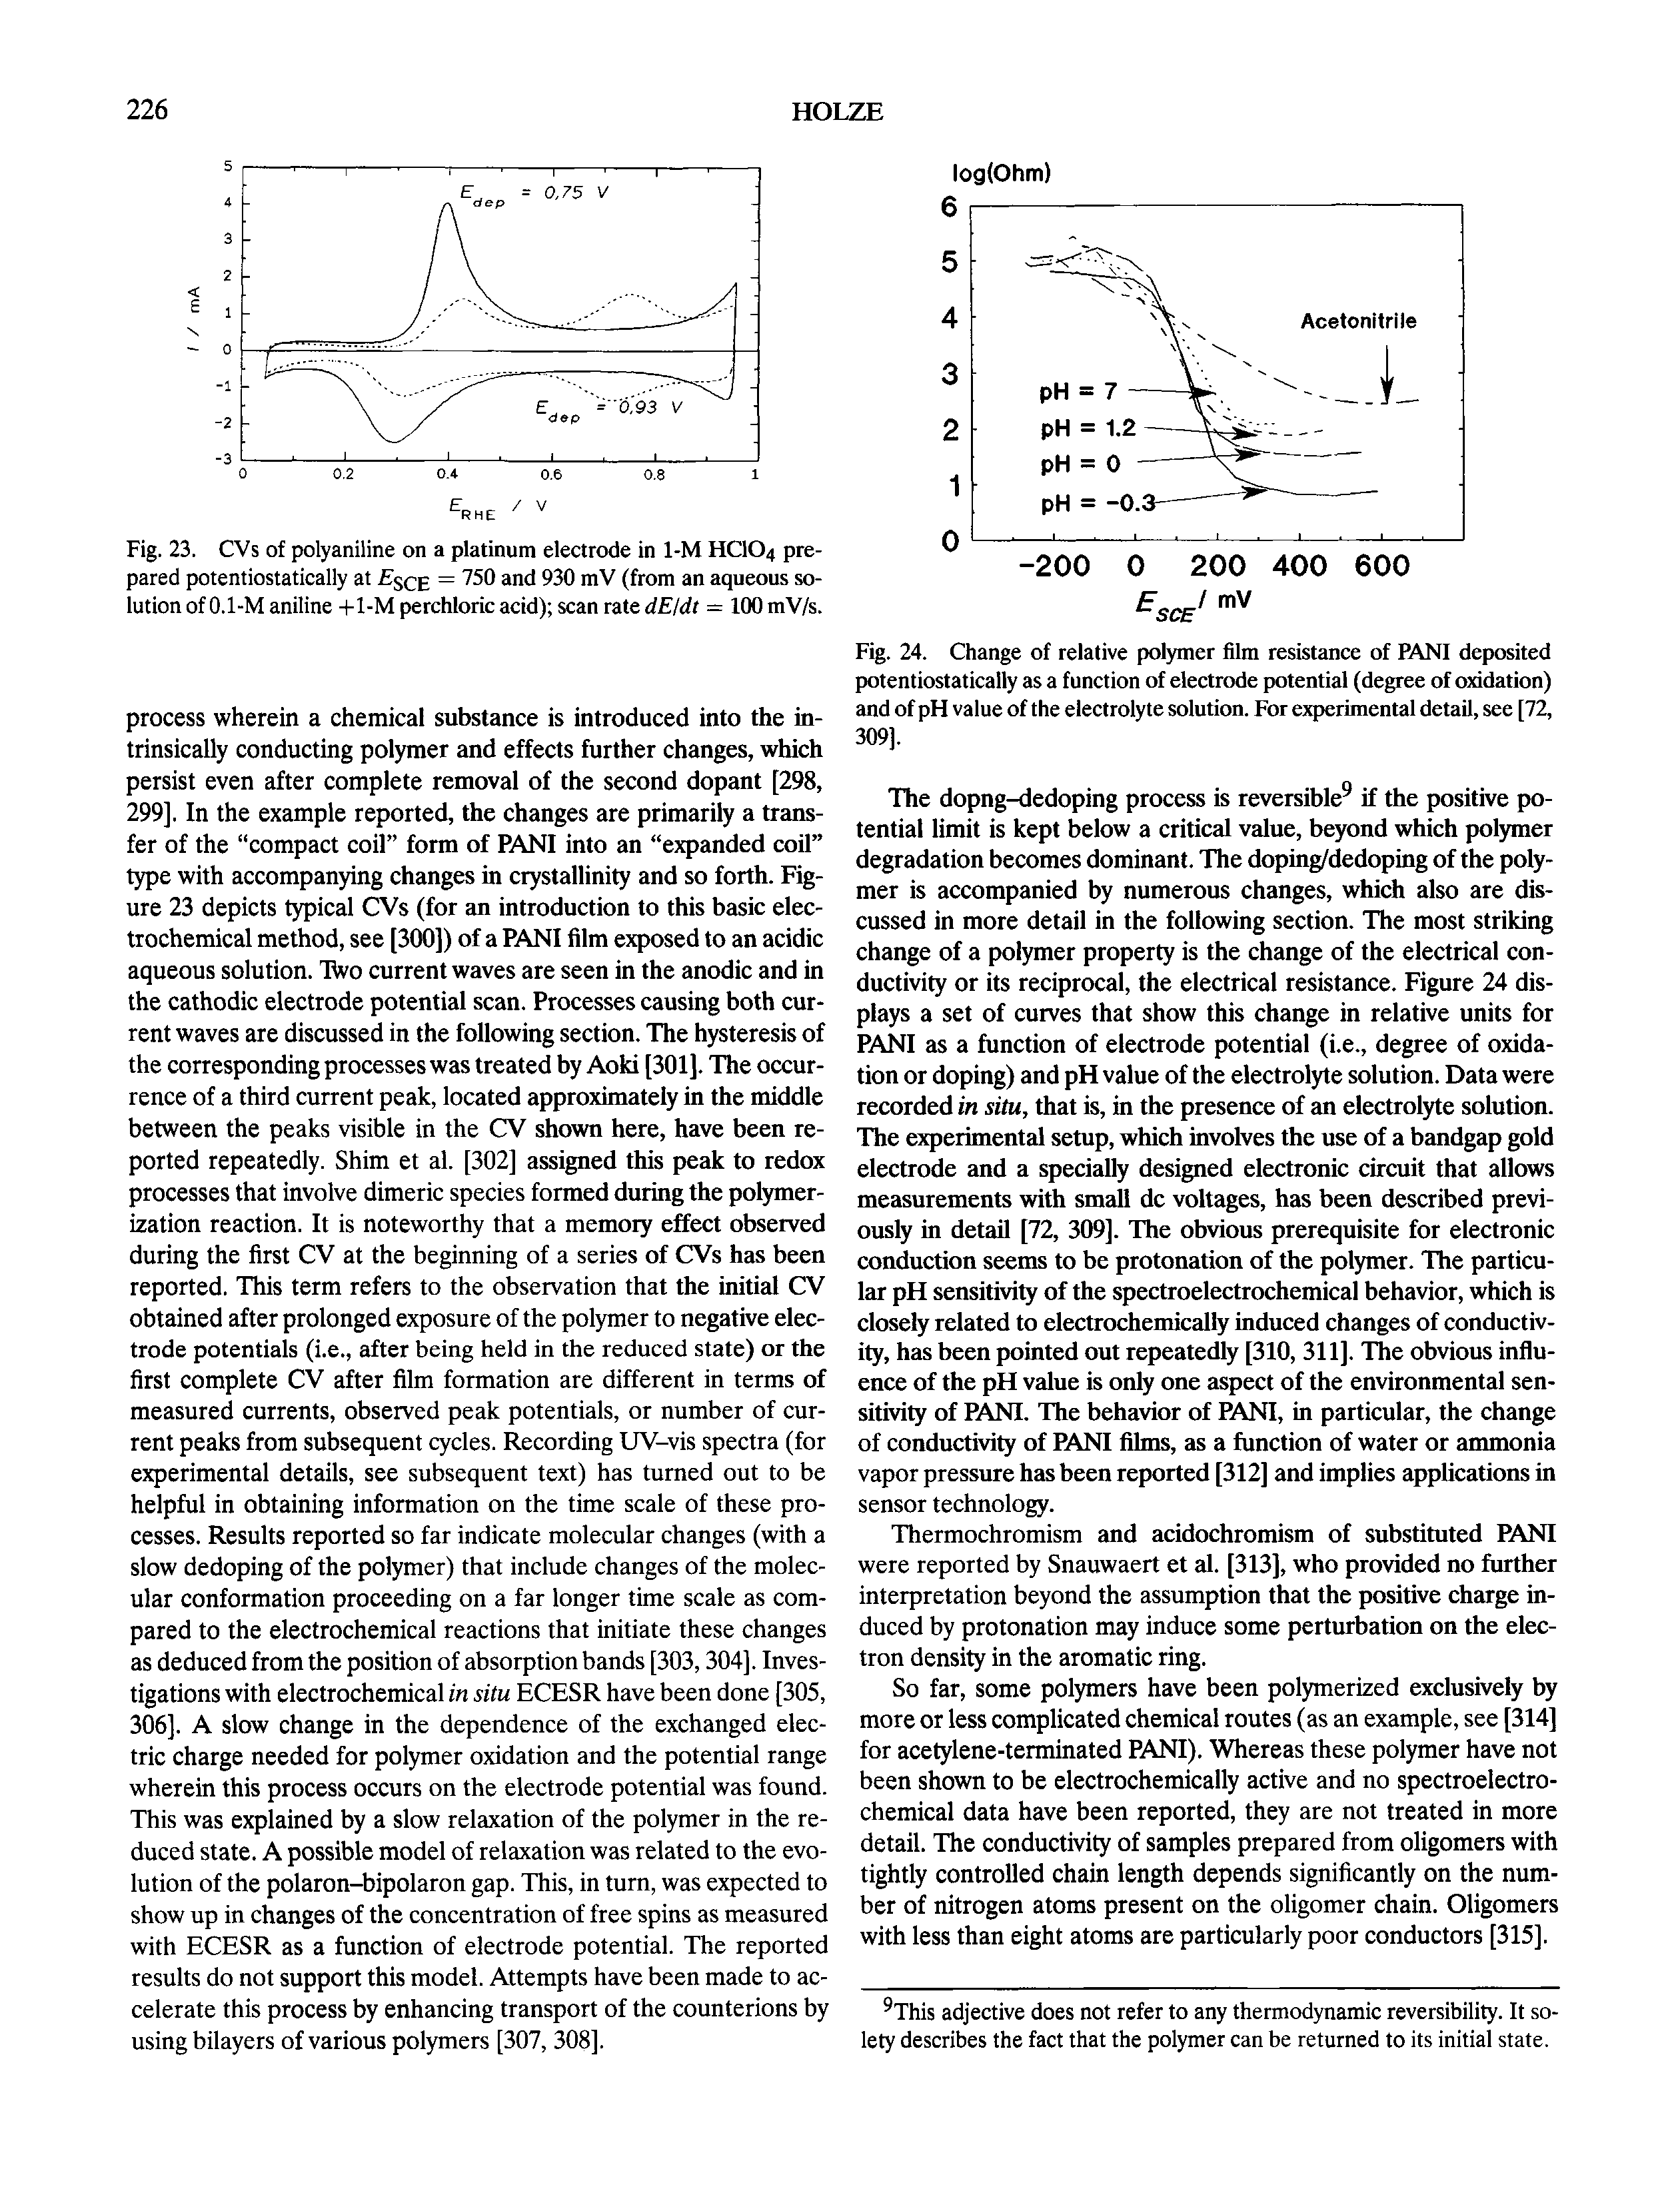 Fig. 24. Change of relative polymer film resistance of PANI deposited potentiostatically as a function of electrode [>otential (degree of oxidation) and of pH value of the electrolyte solution. For experimental detail, see [72, 309].